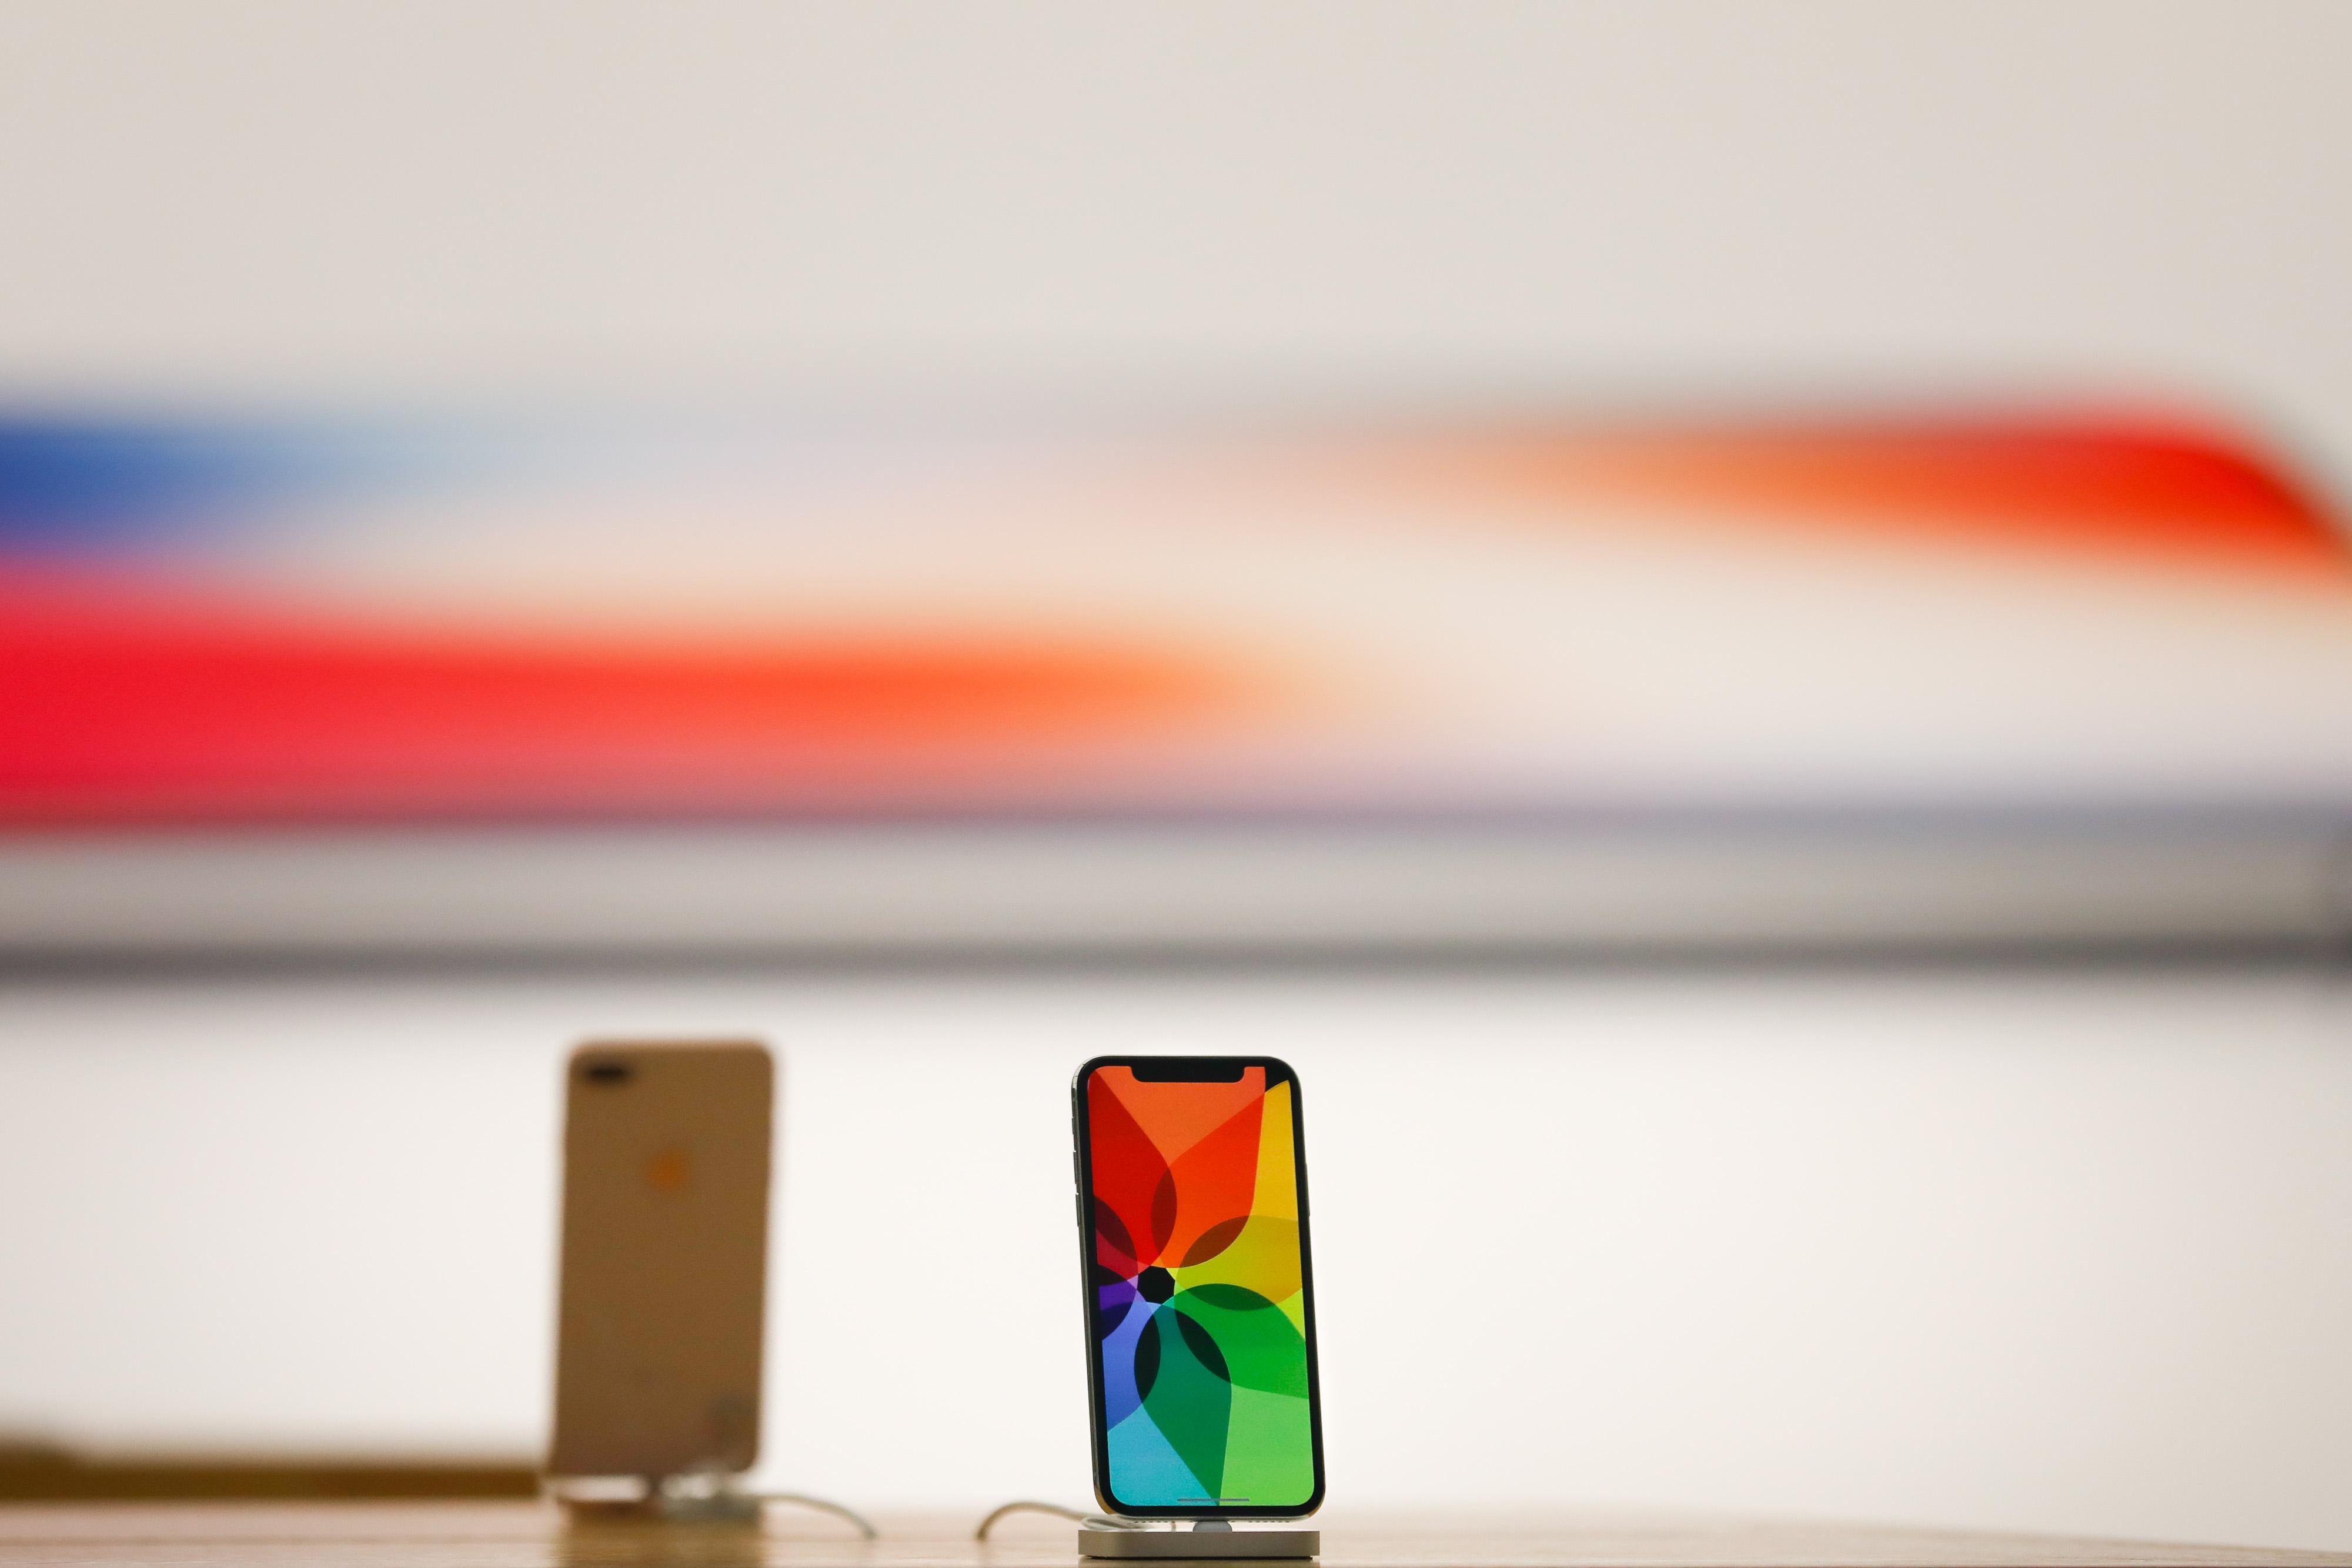 The new iPhone X is seen in the Apple Store Union Square prior to launch on November 3, 2017, in San Francisco, California.
Apple's iPhone X hit stores around the world Friday, drawing crowds in many locations and protests in others as the new flagship device hit stores in some 50 markets worldwide. / AFP PHOTO / Elijah Nouvelage        (Photo credit should read ELIJAH NOUVELAGE/AFP/Getty Images)